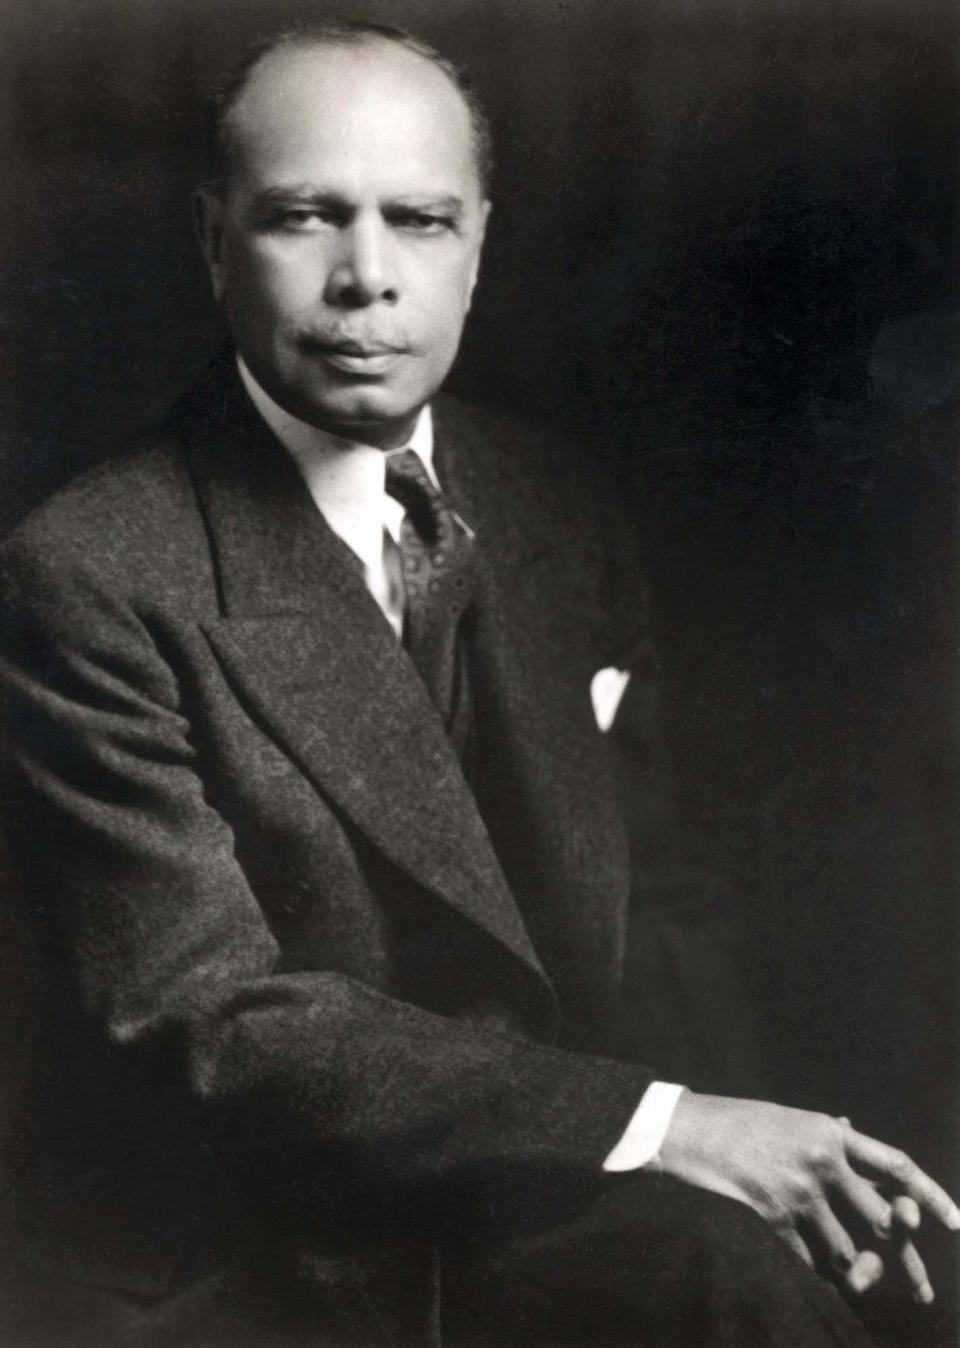 James Weldon Johnson, pictured in 1937, was a lawyer, teacher, author and activist who wrote hit songs